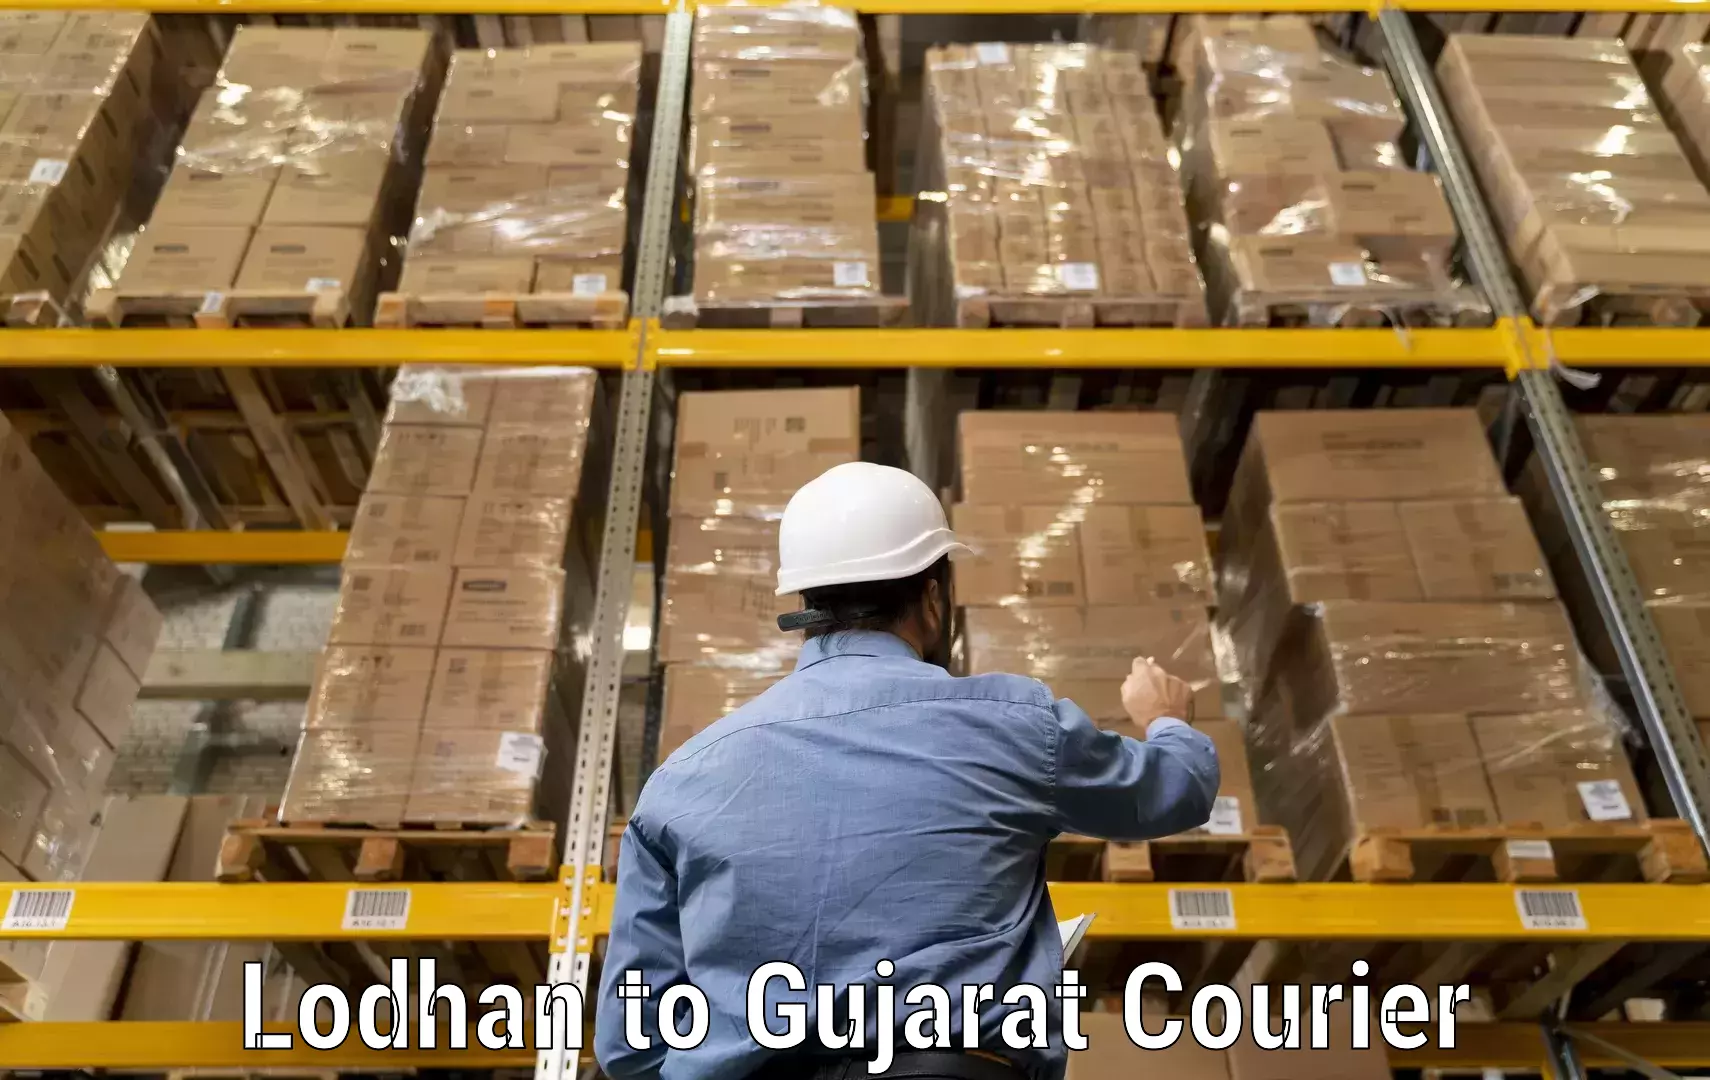 Nationwide courier service Lodhan to Ahmedabad